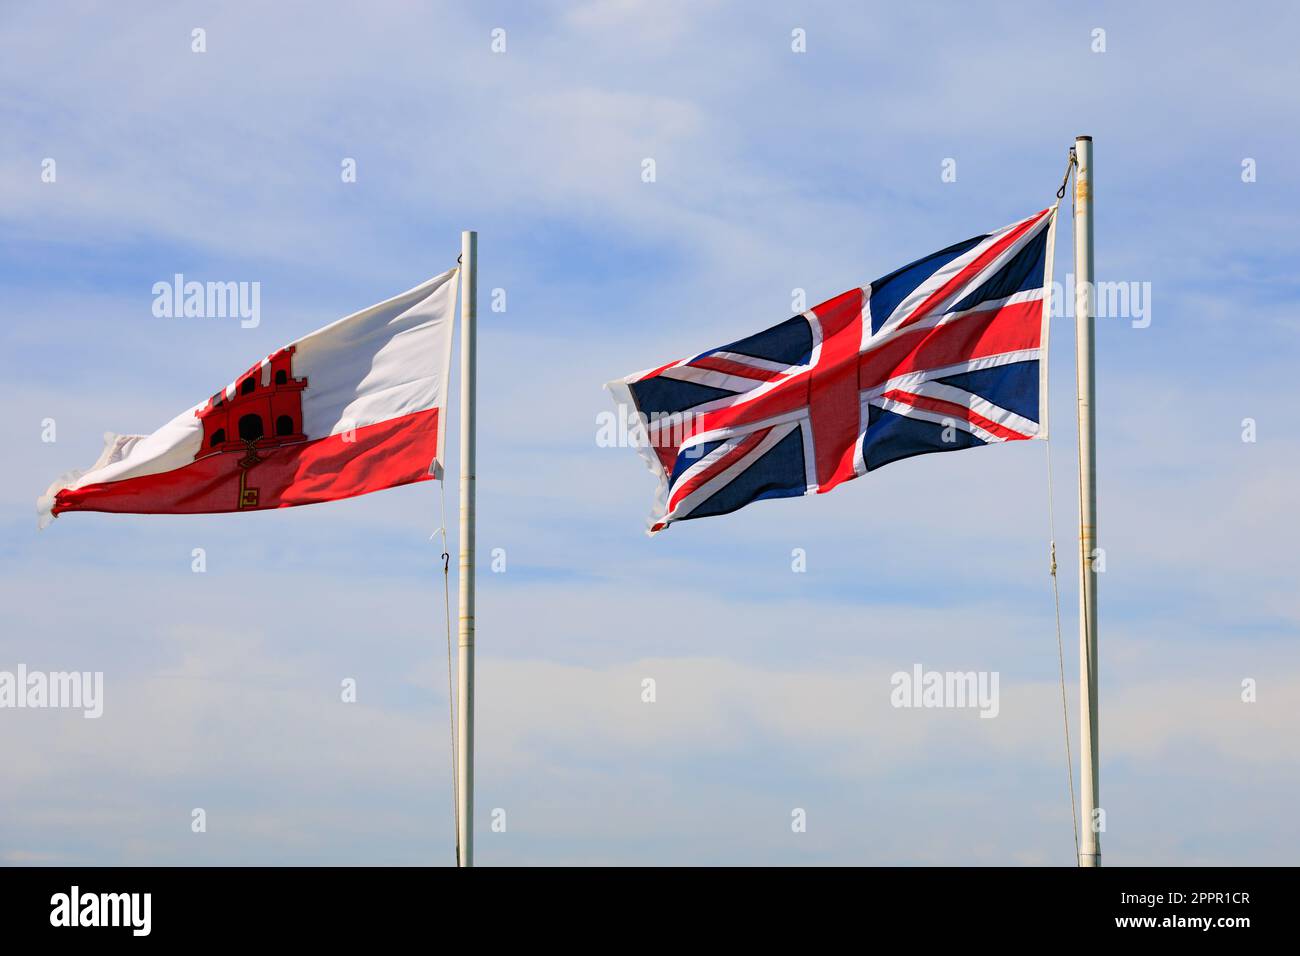 Flag of Gibraltar and Union Jack flying side by side. The British Overseas Territory of Gibraltar, the Rock of Gibraltar on the Iberian Peninsula. Stock Photo